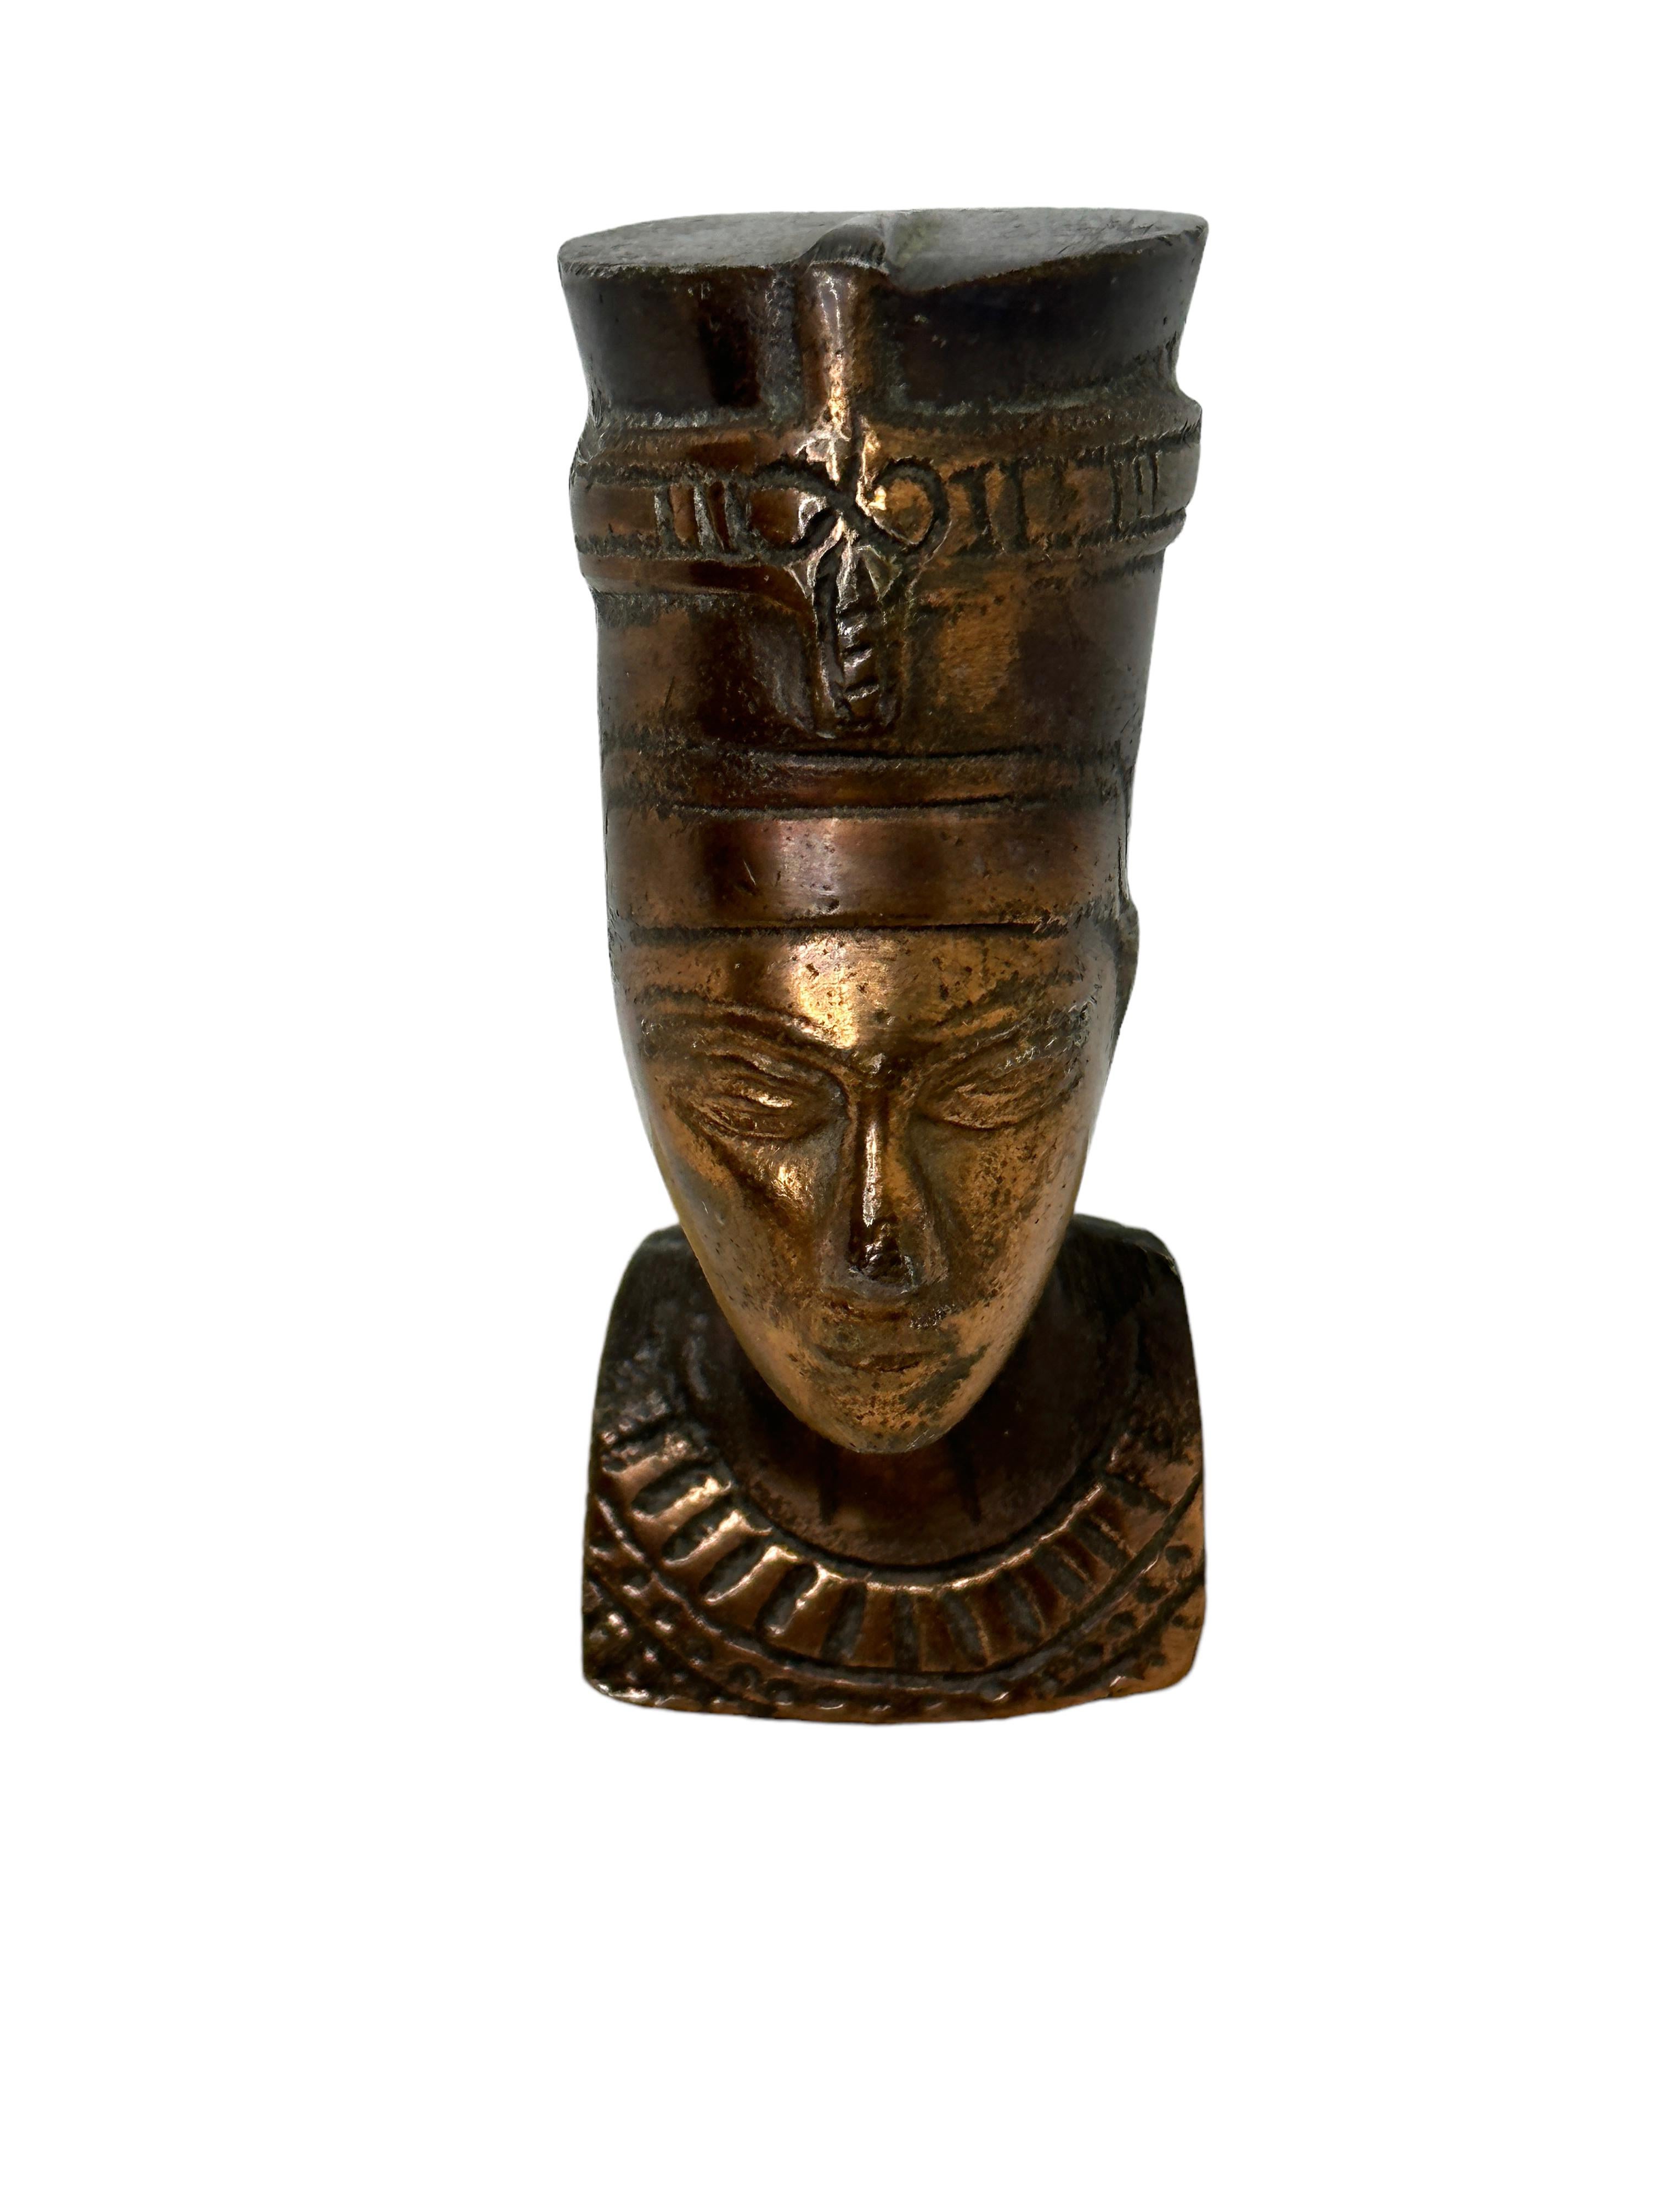 Mid-Century Modern Vintage Decorative Nefertiti Egyptian Queen Bust Statue on Marble Base For Sale